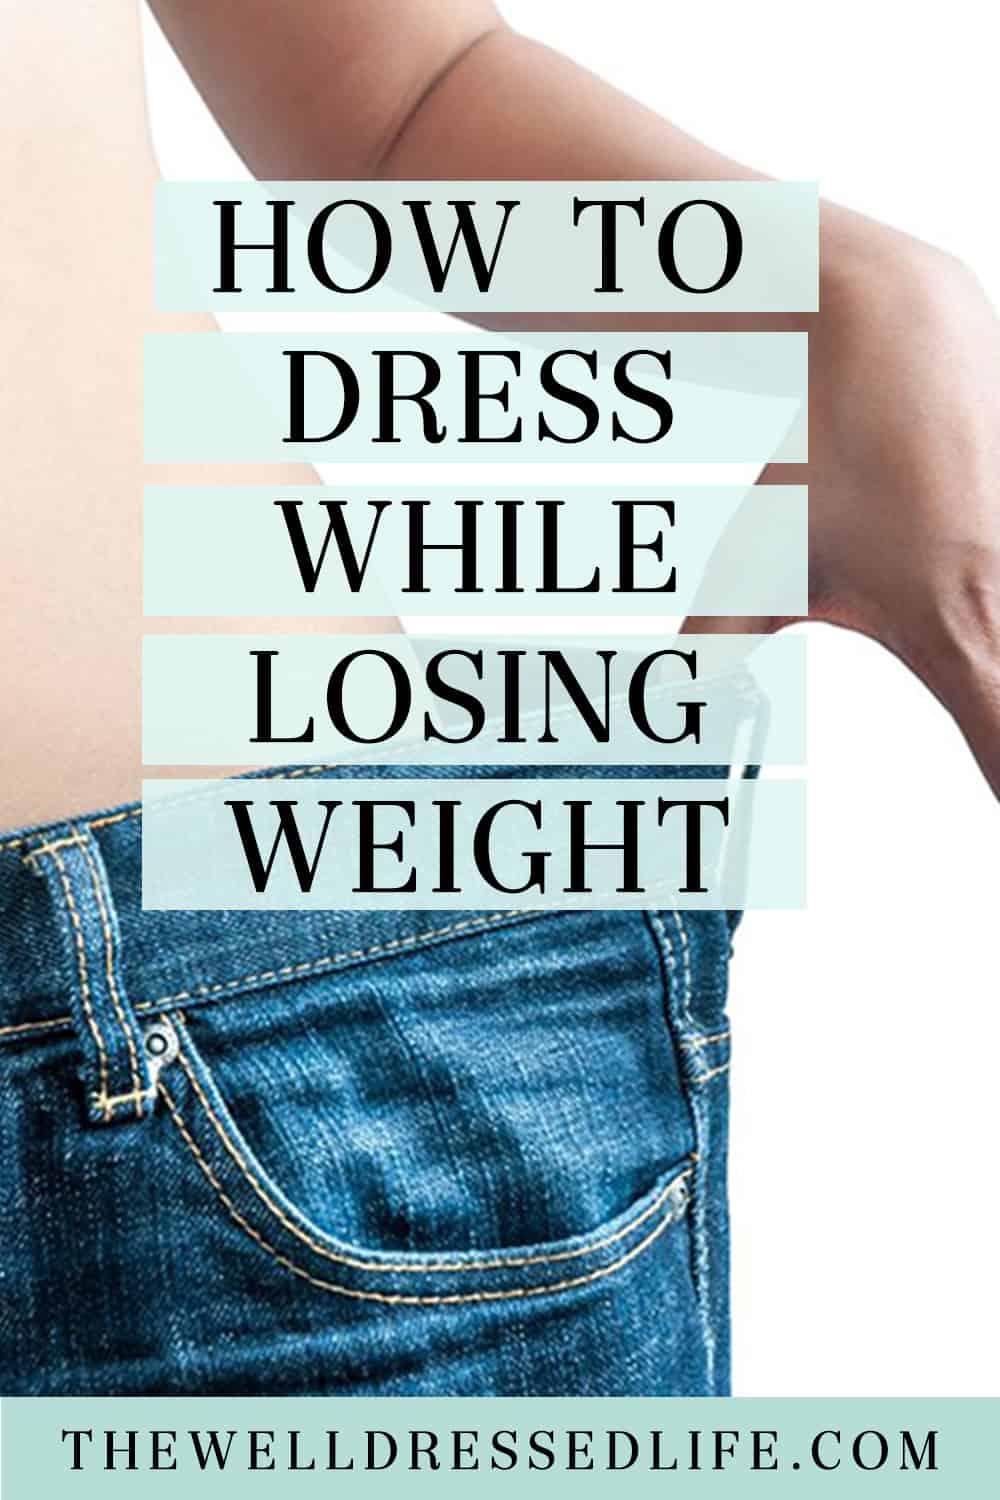 How to Dress While Losing Weight